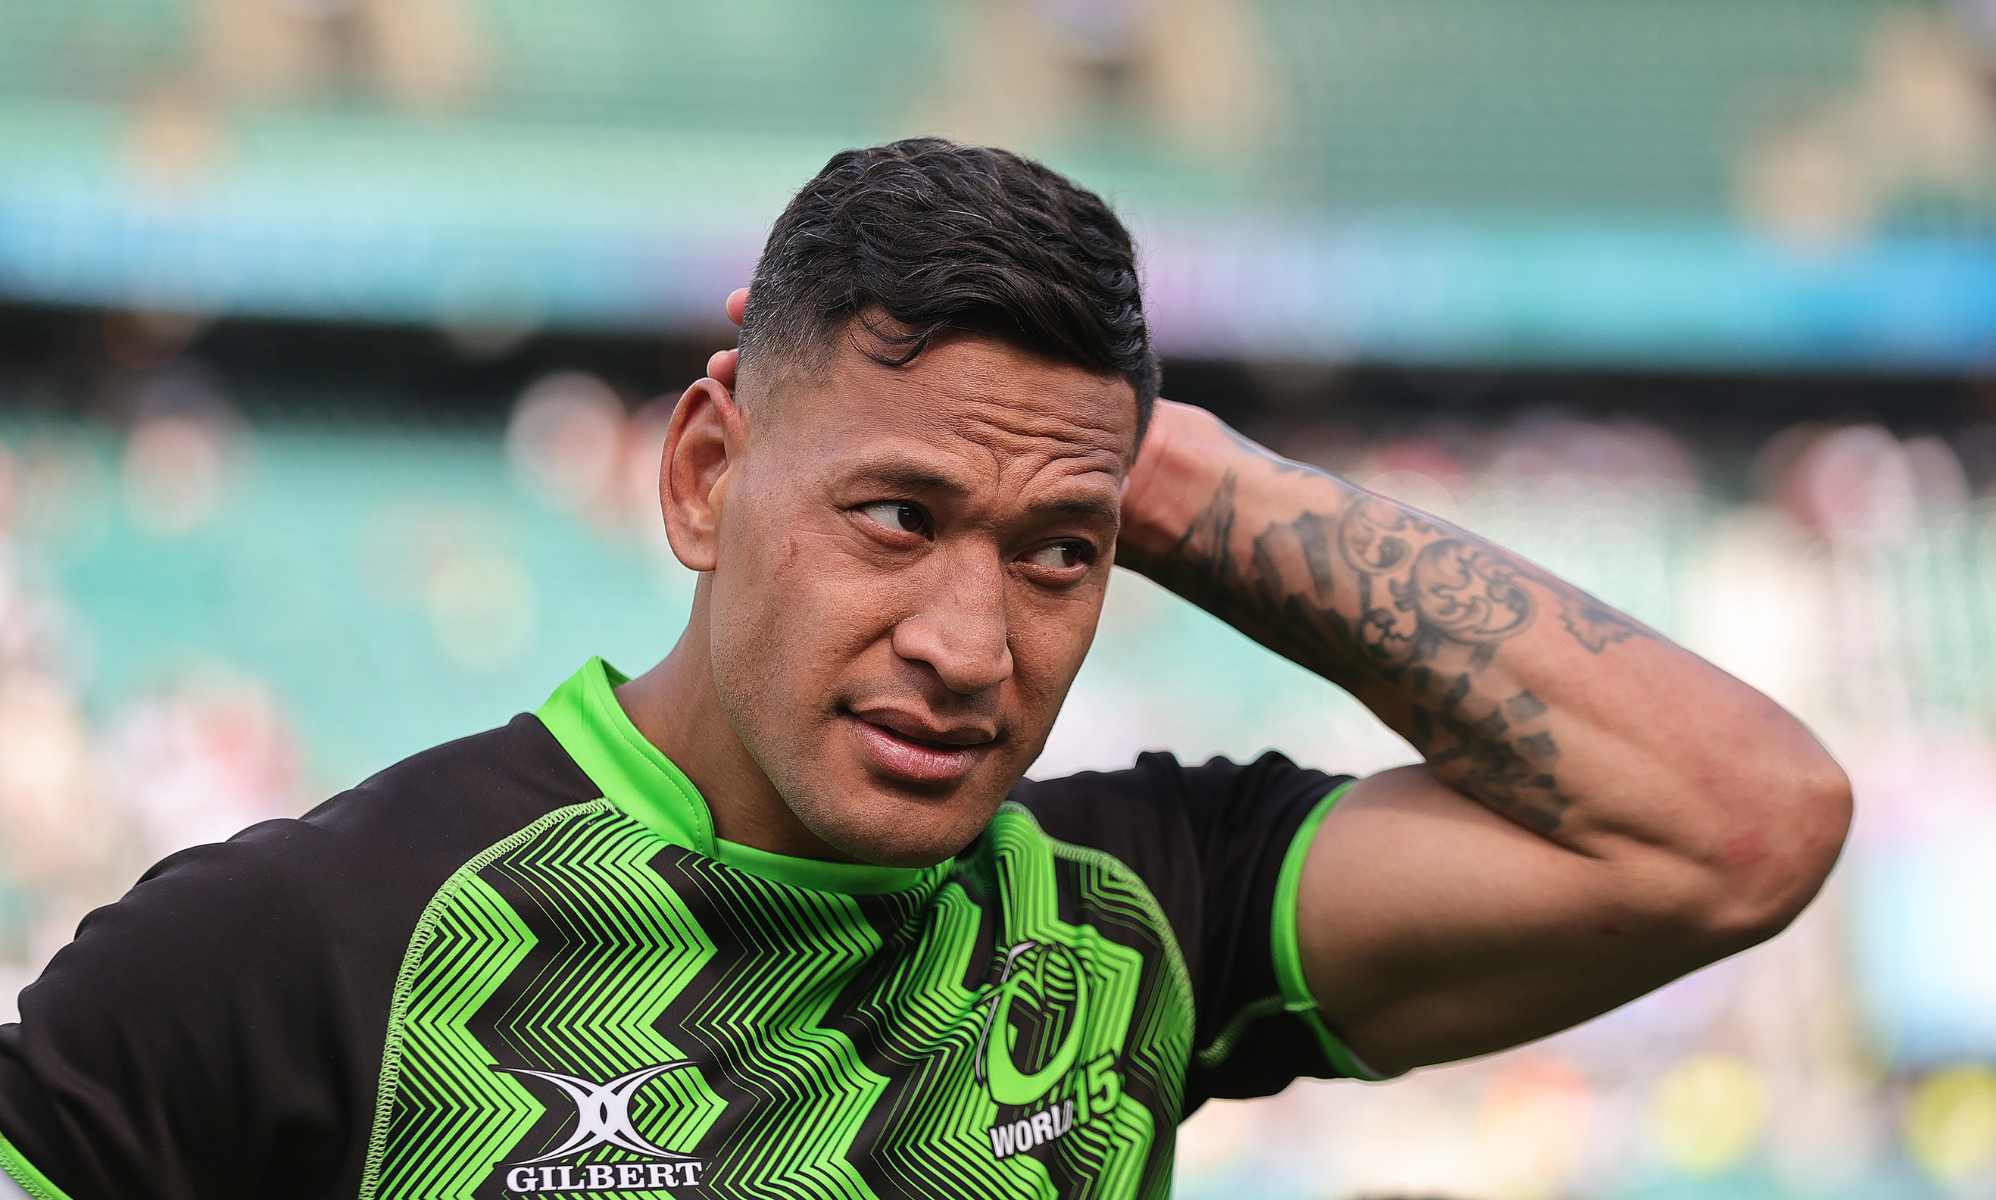 X X X Xporn - Israel Folau should be allowed to move on, World XV coach says